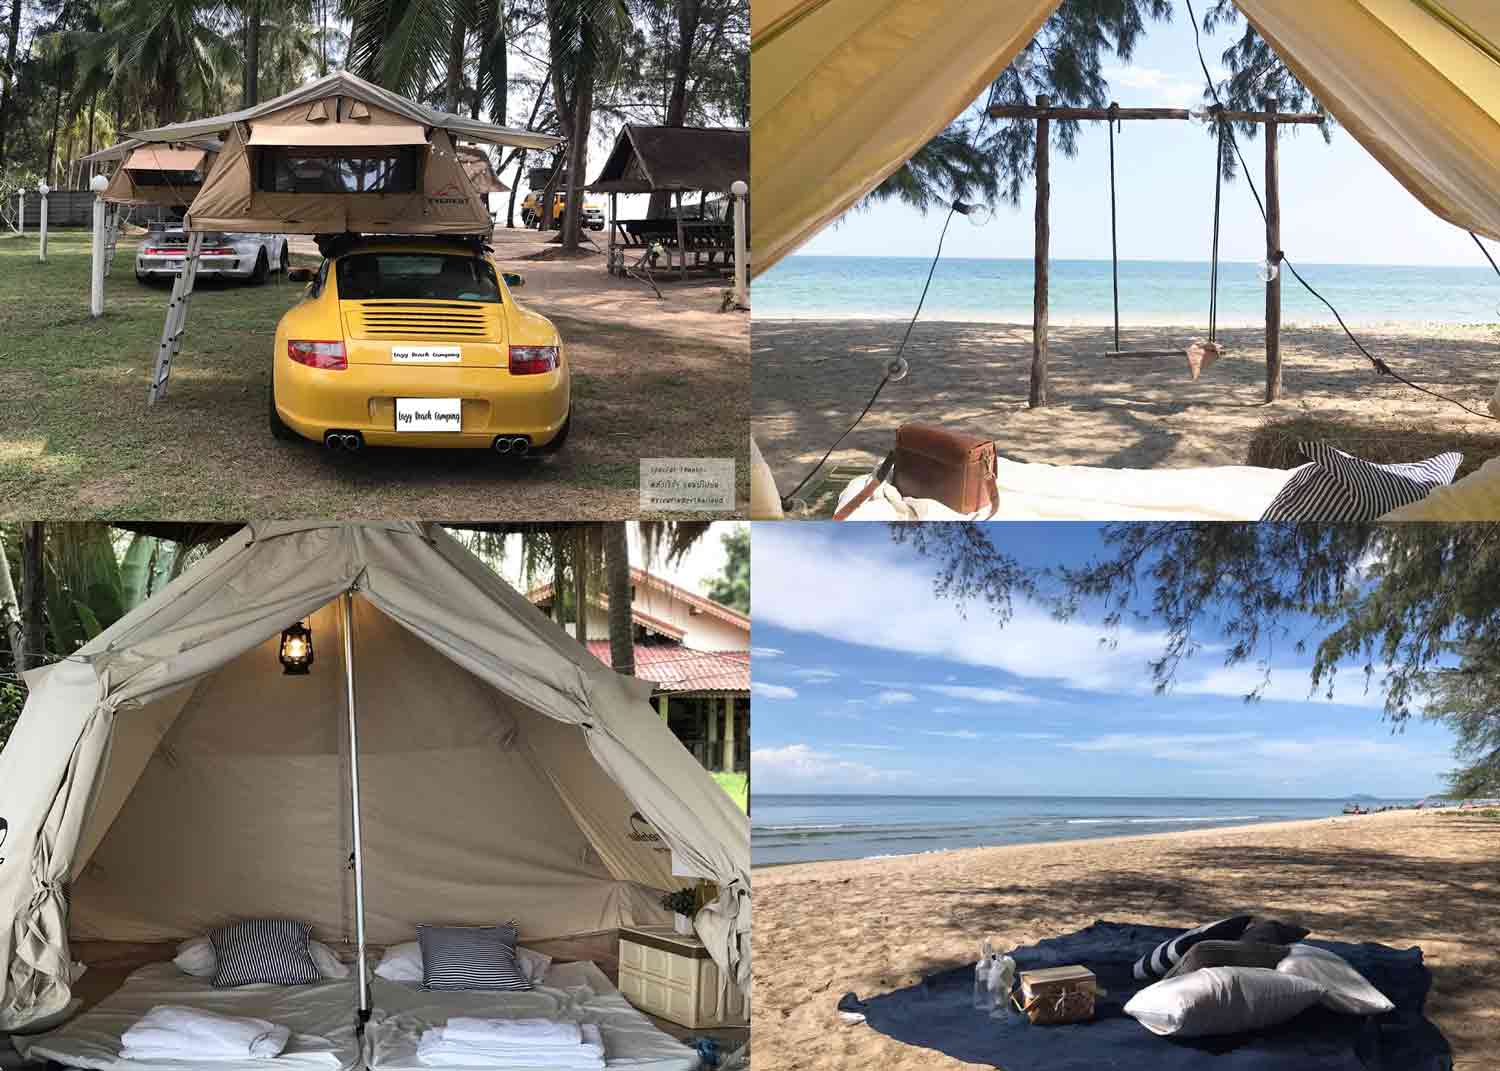 lazybeachcamping